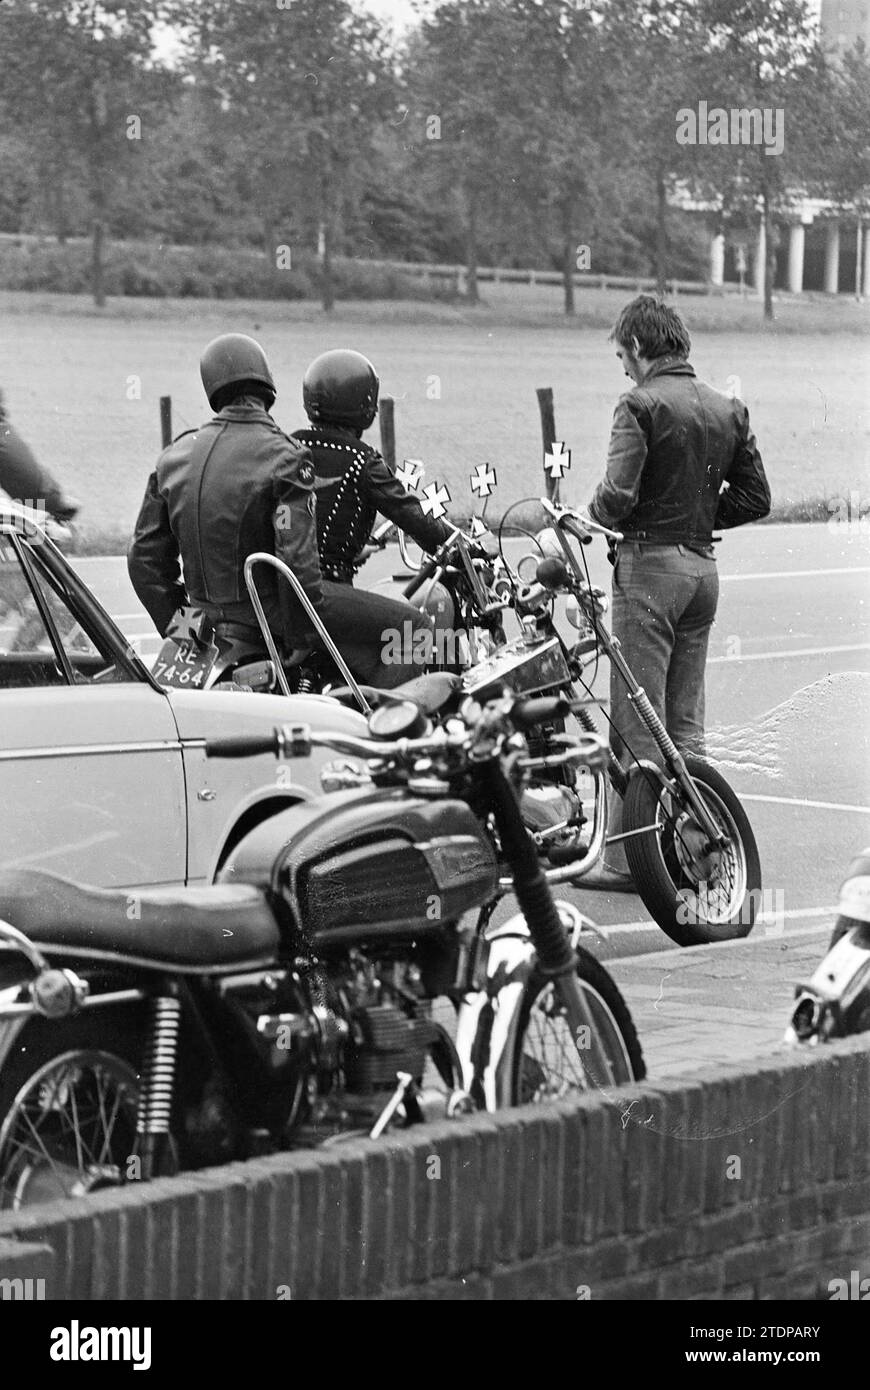 Motorcyclists., Whizgle News from the Past, Tailored for the Future. Explore historical narratives, Dutch The Netherlands agency image with a modern perspective, bridging the gap between yesterday's events and tomorrow's insights. A timeless journey shaping the stories that shape our future Stock Photo